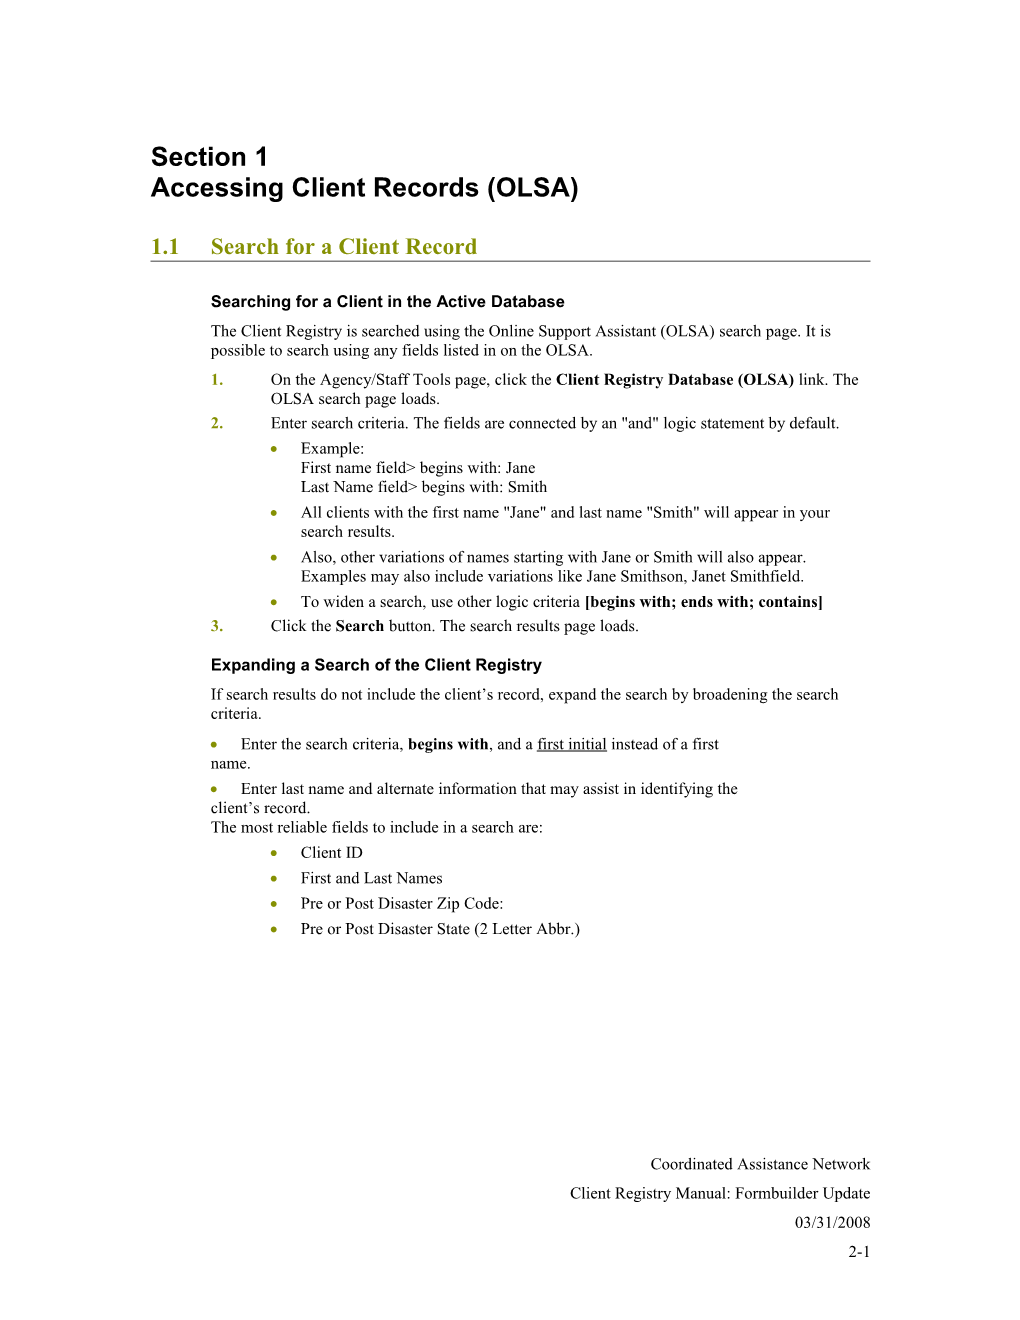 Section 1Accessing Client Records (OLSA)